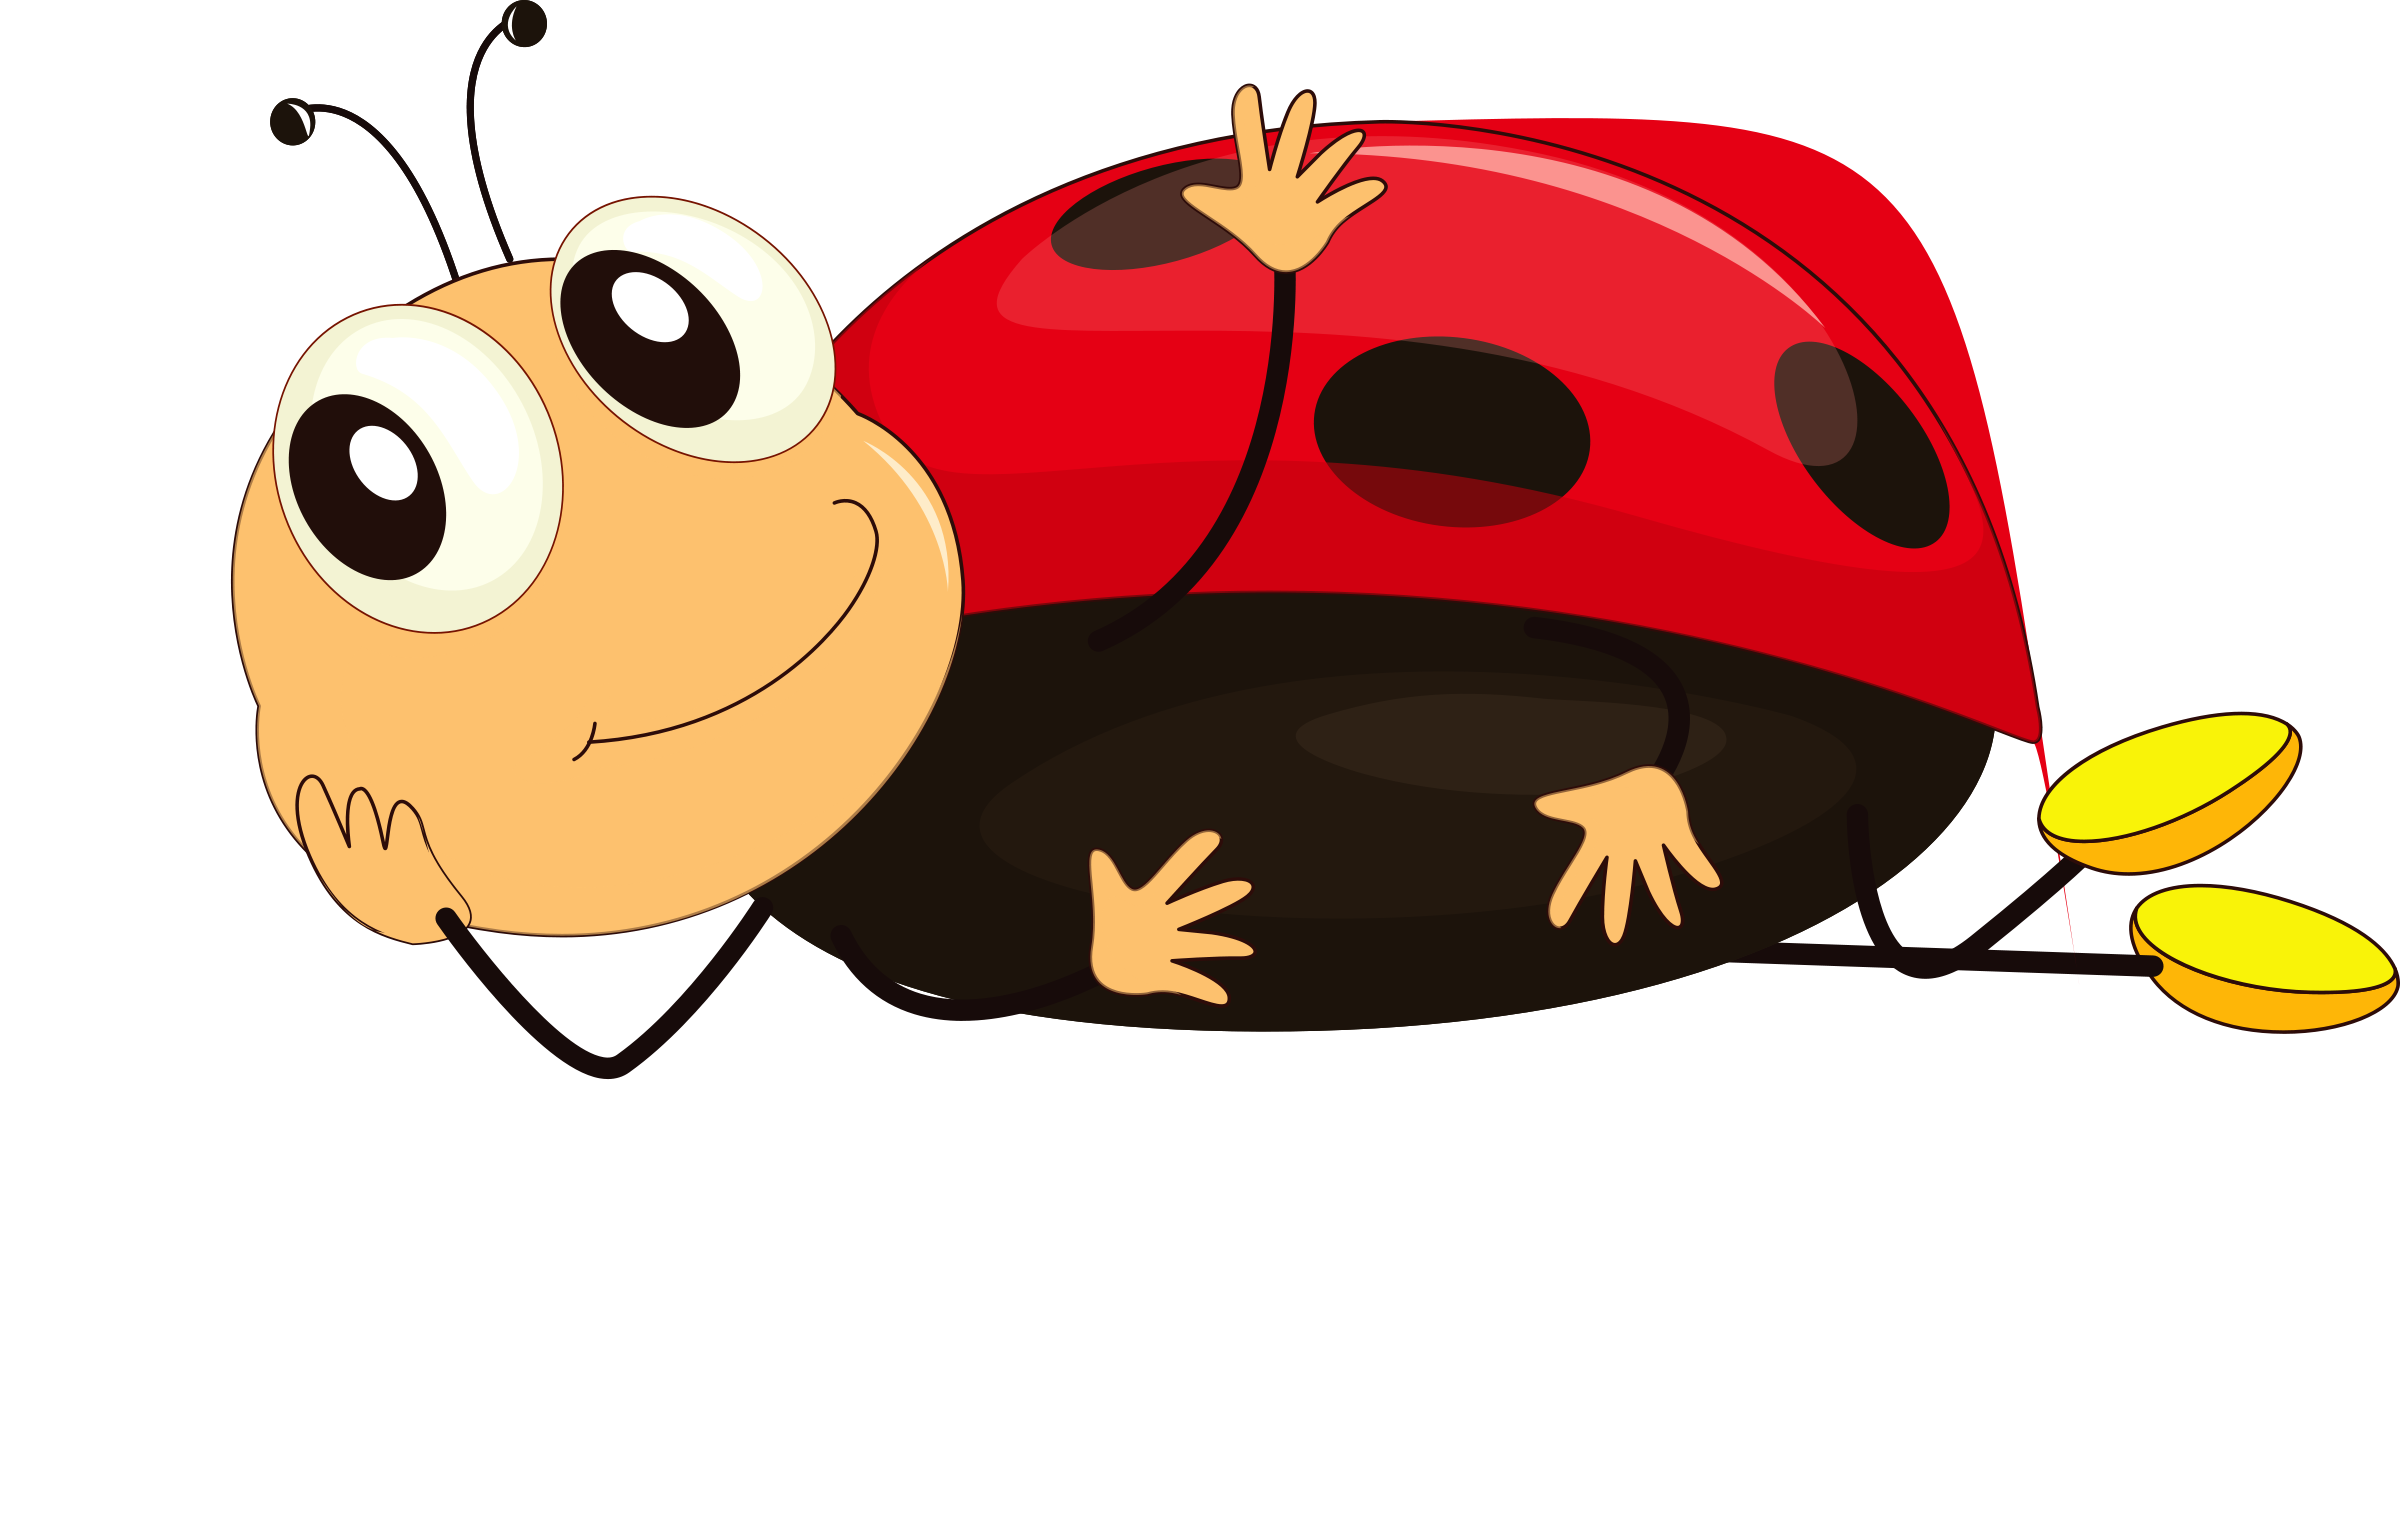 Cartoon Insect Clipart